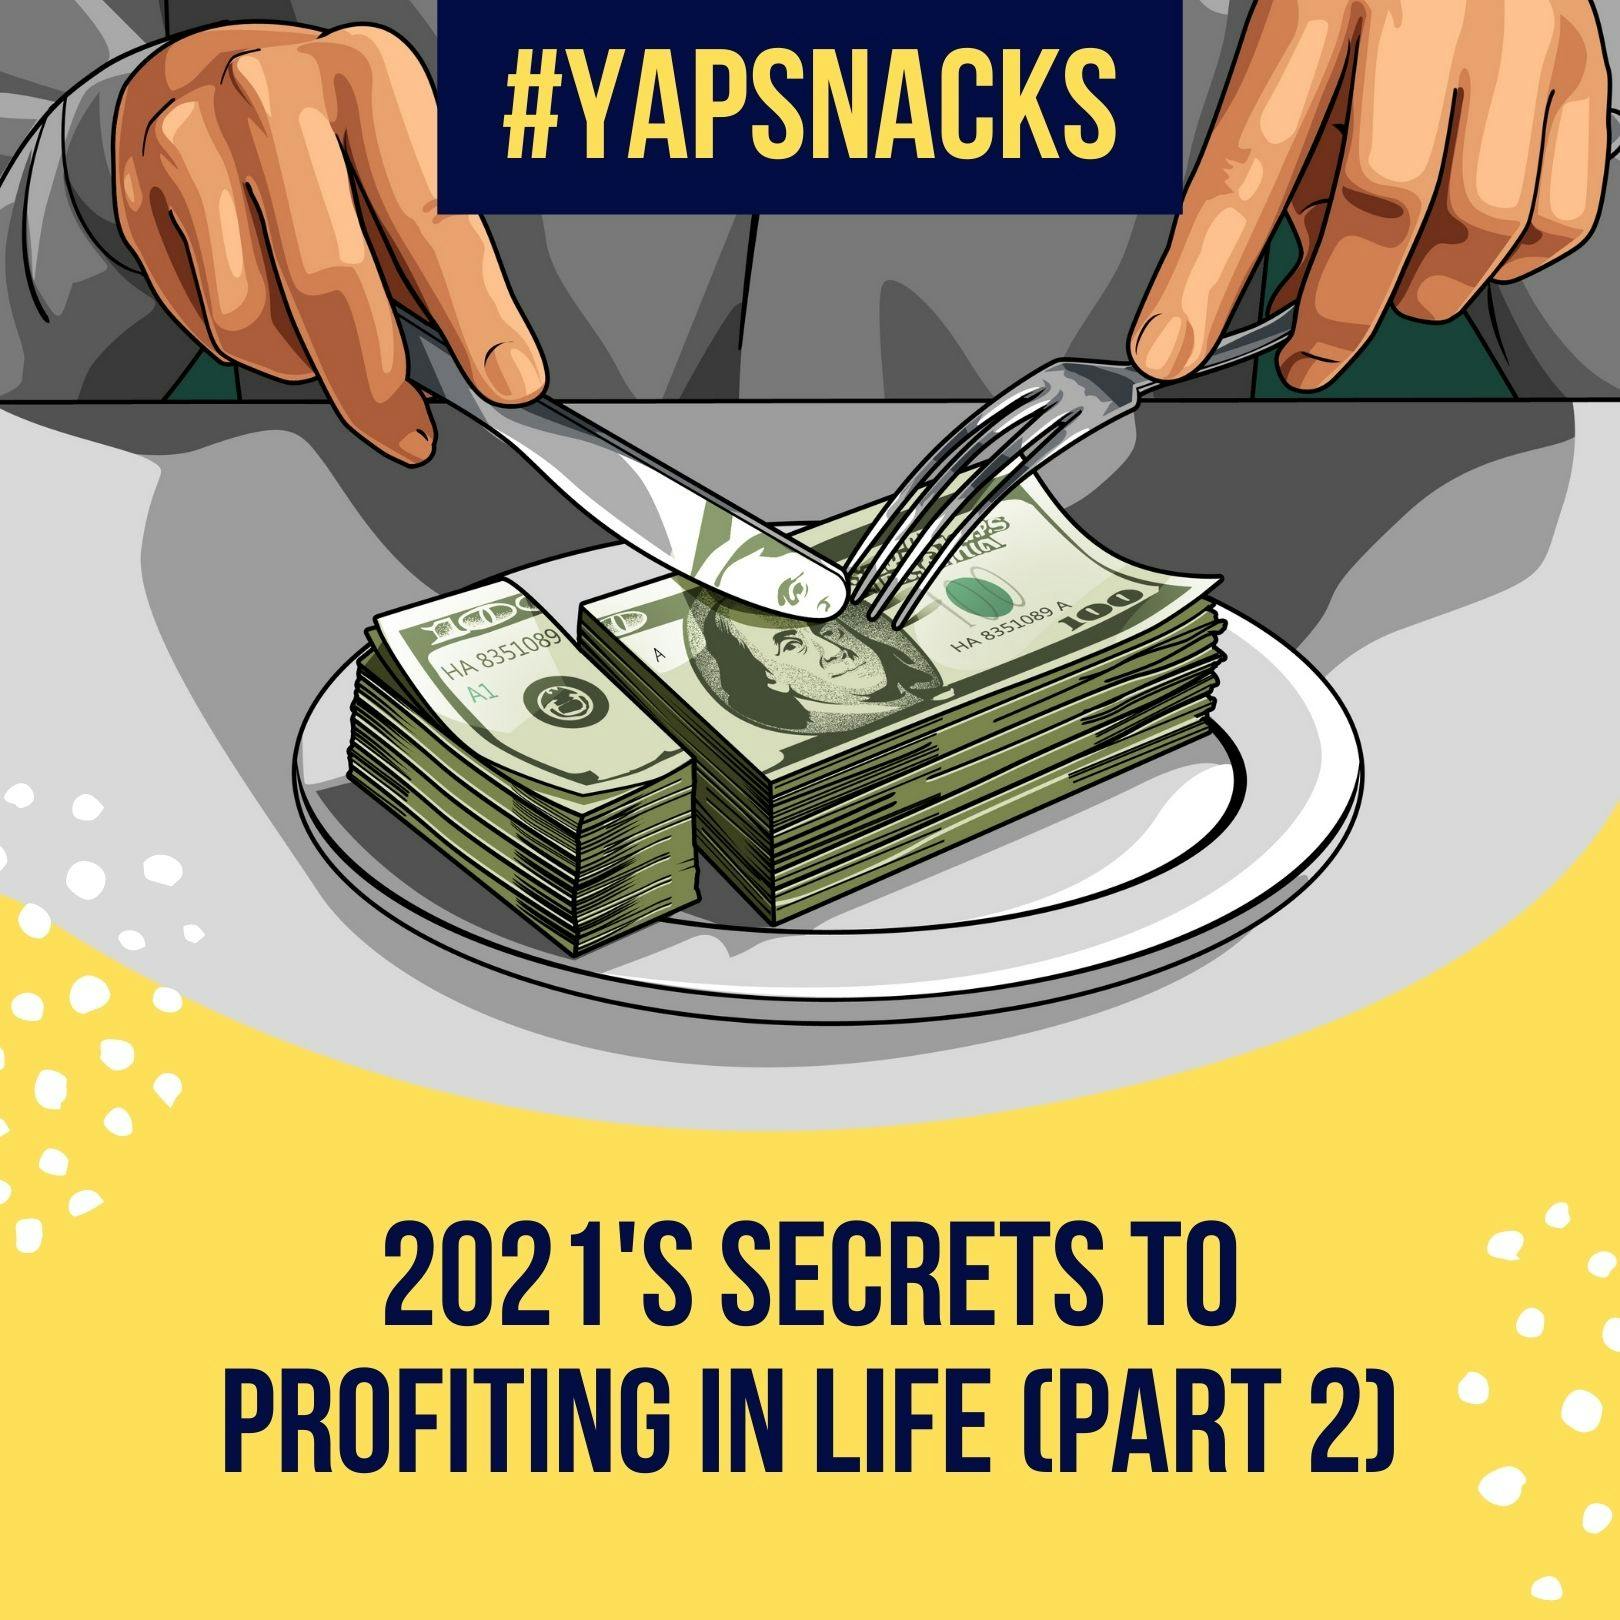 YAPSnacks: 2021's Secrets to Profiting in Life - Love and Service | Part 2 by Hala Taha | YAP Media Network